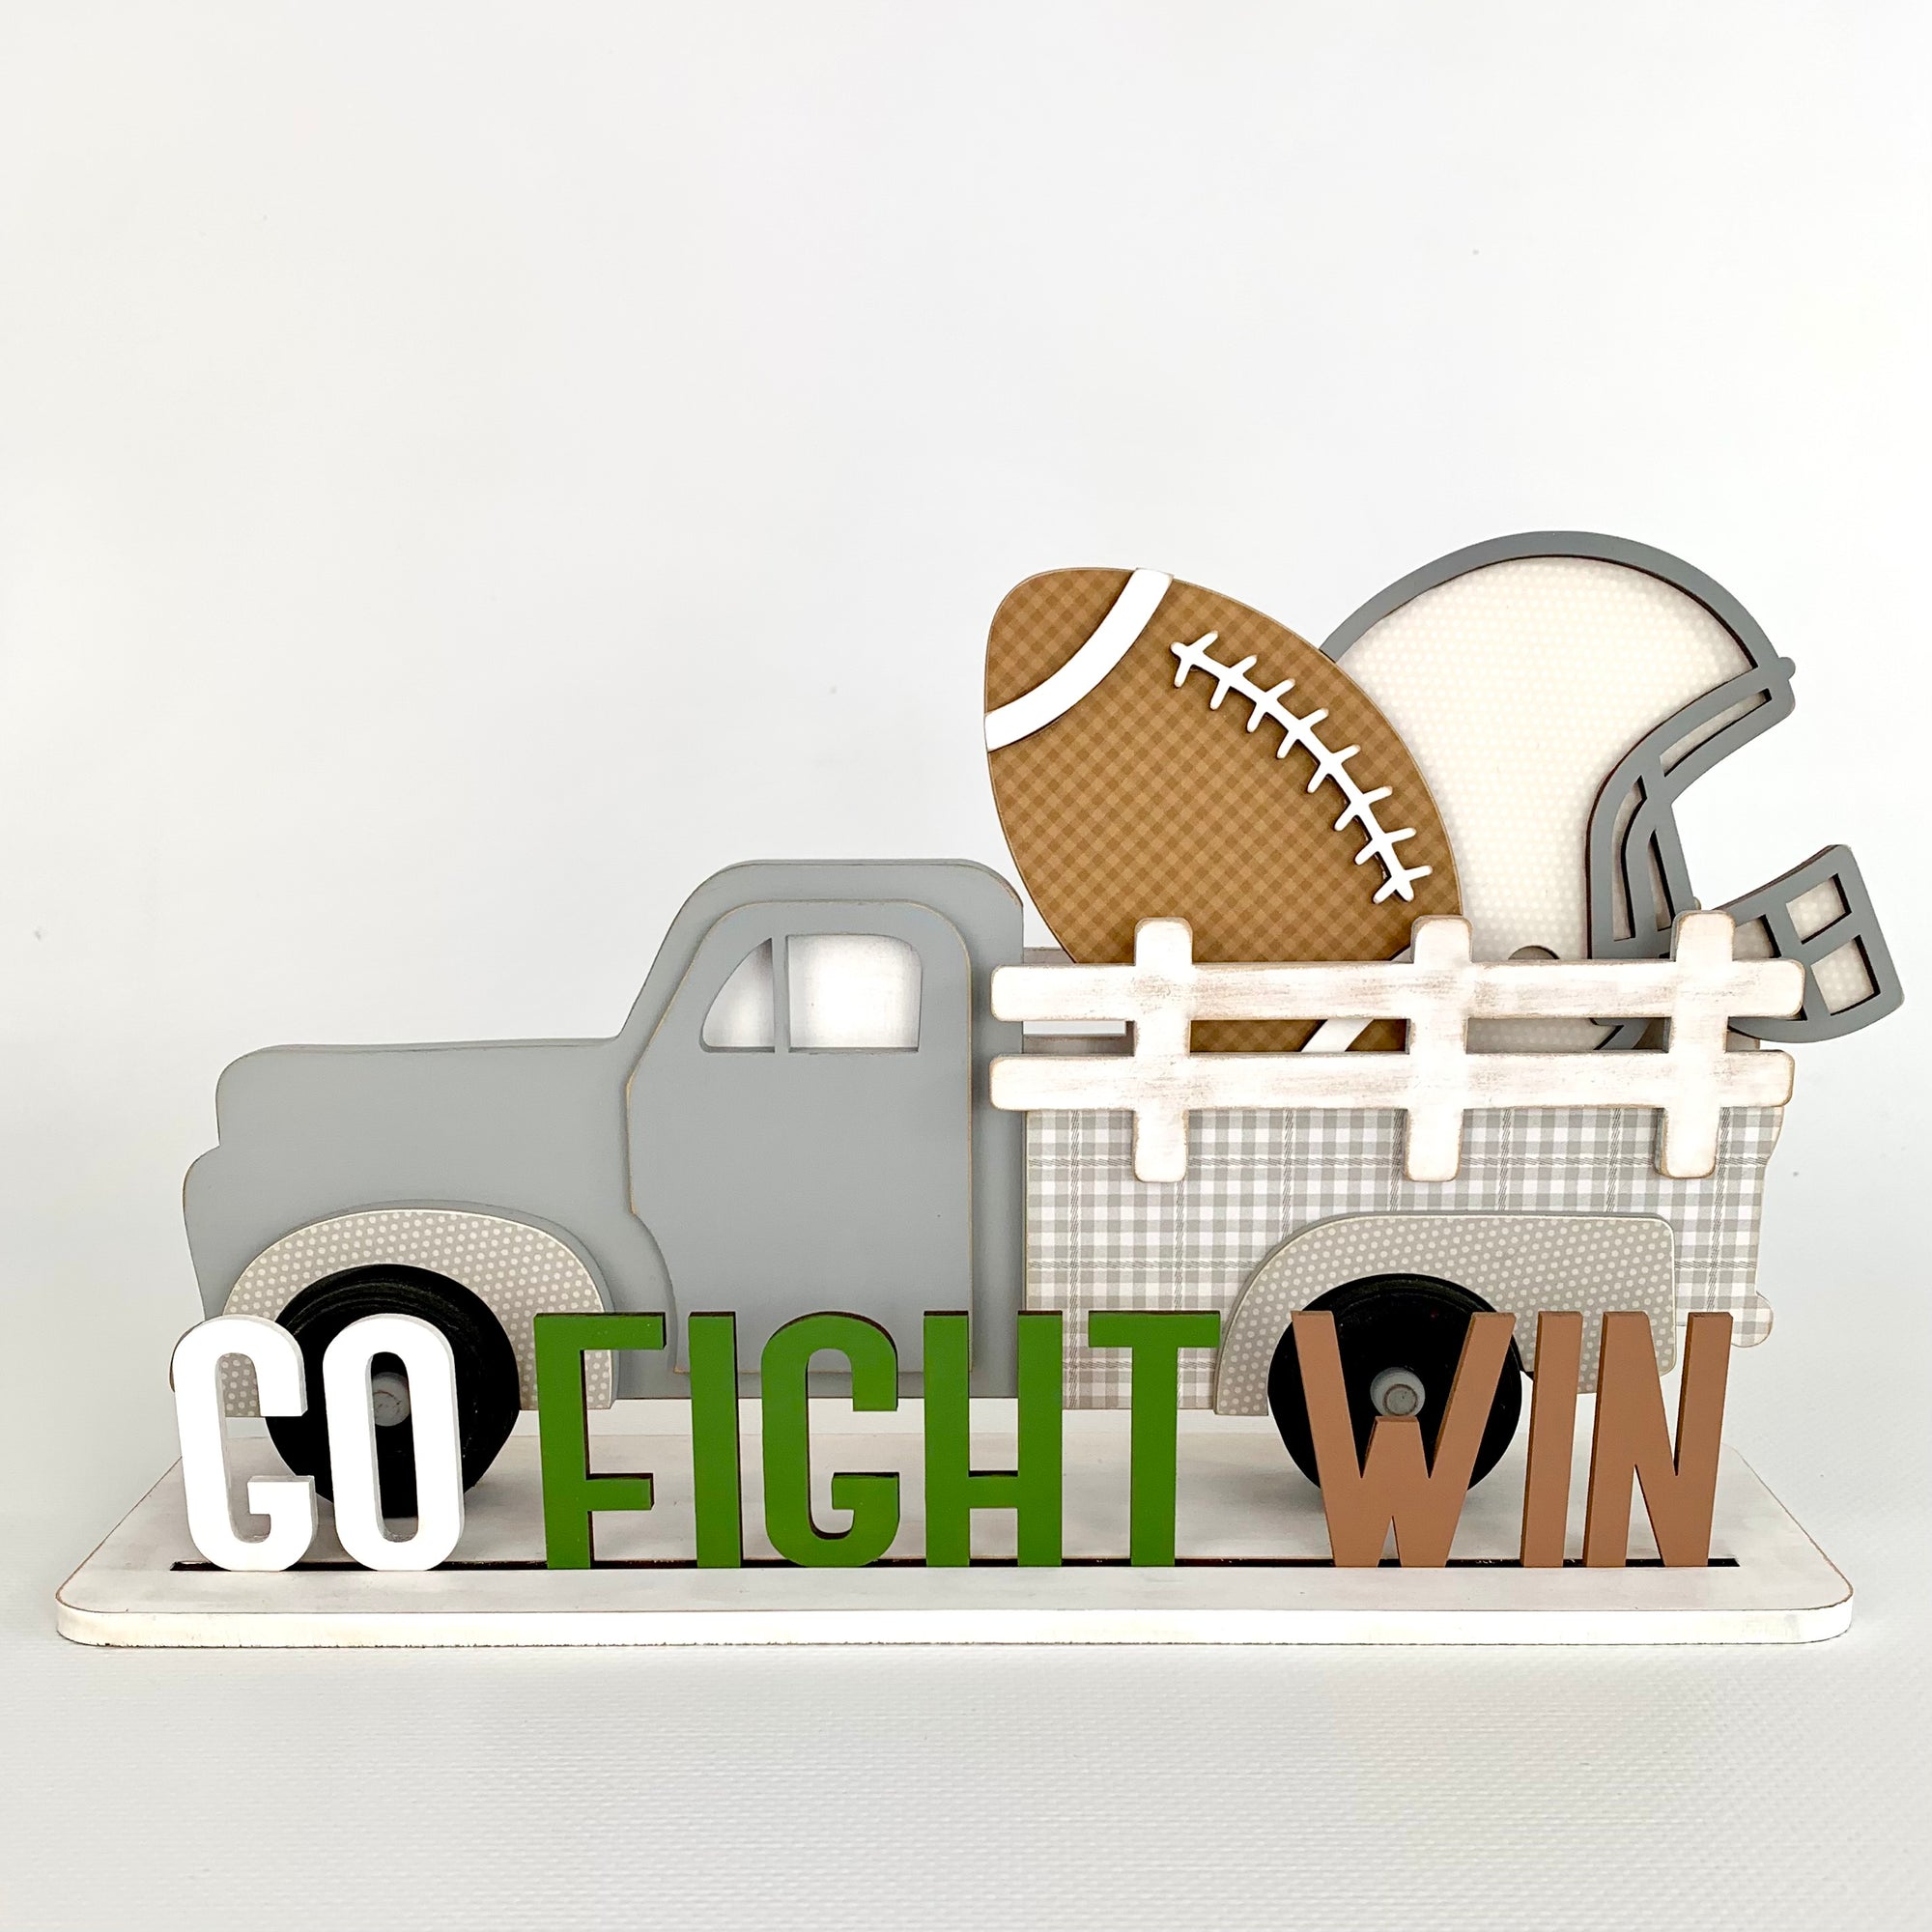 Interchangeable wood pick up truck that has inserts in the back to change our seasonally or monthly.  Truck shown has a football themed insert with a football, helmet, and go fight win title. 